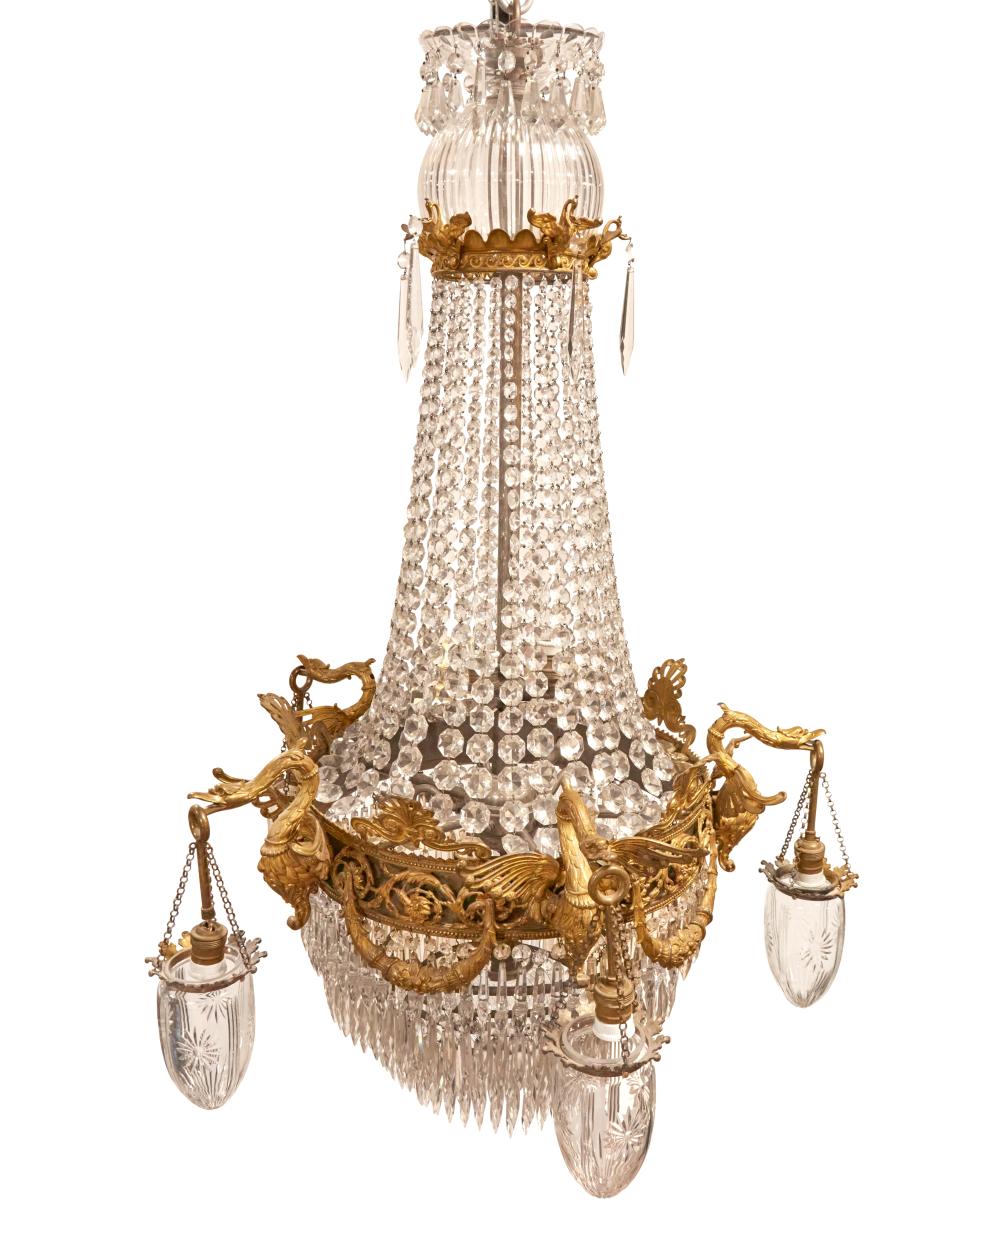 A FRENCH EMPIRE STYLE DRAPED CHANDELIERA 30b28b